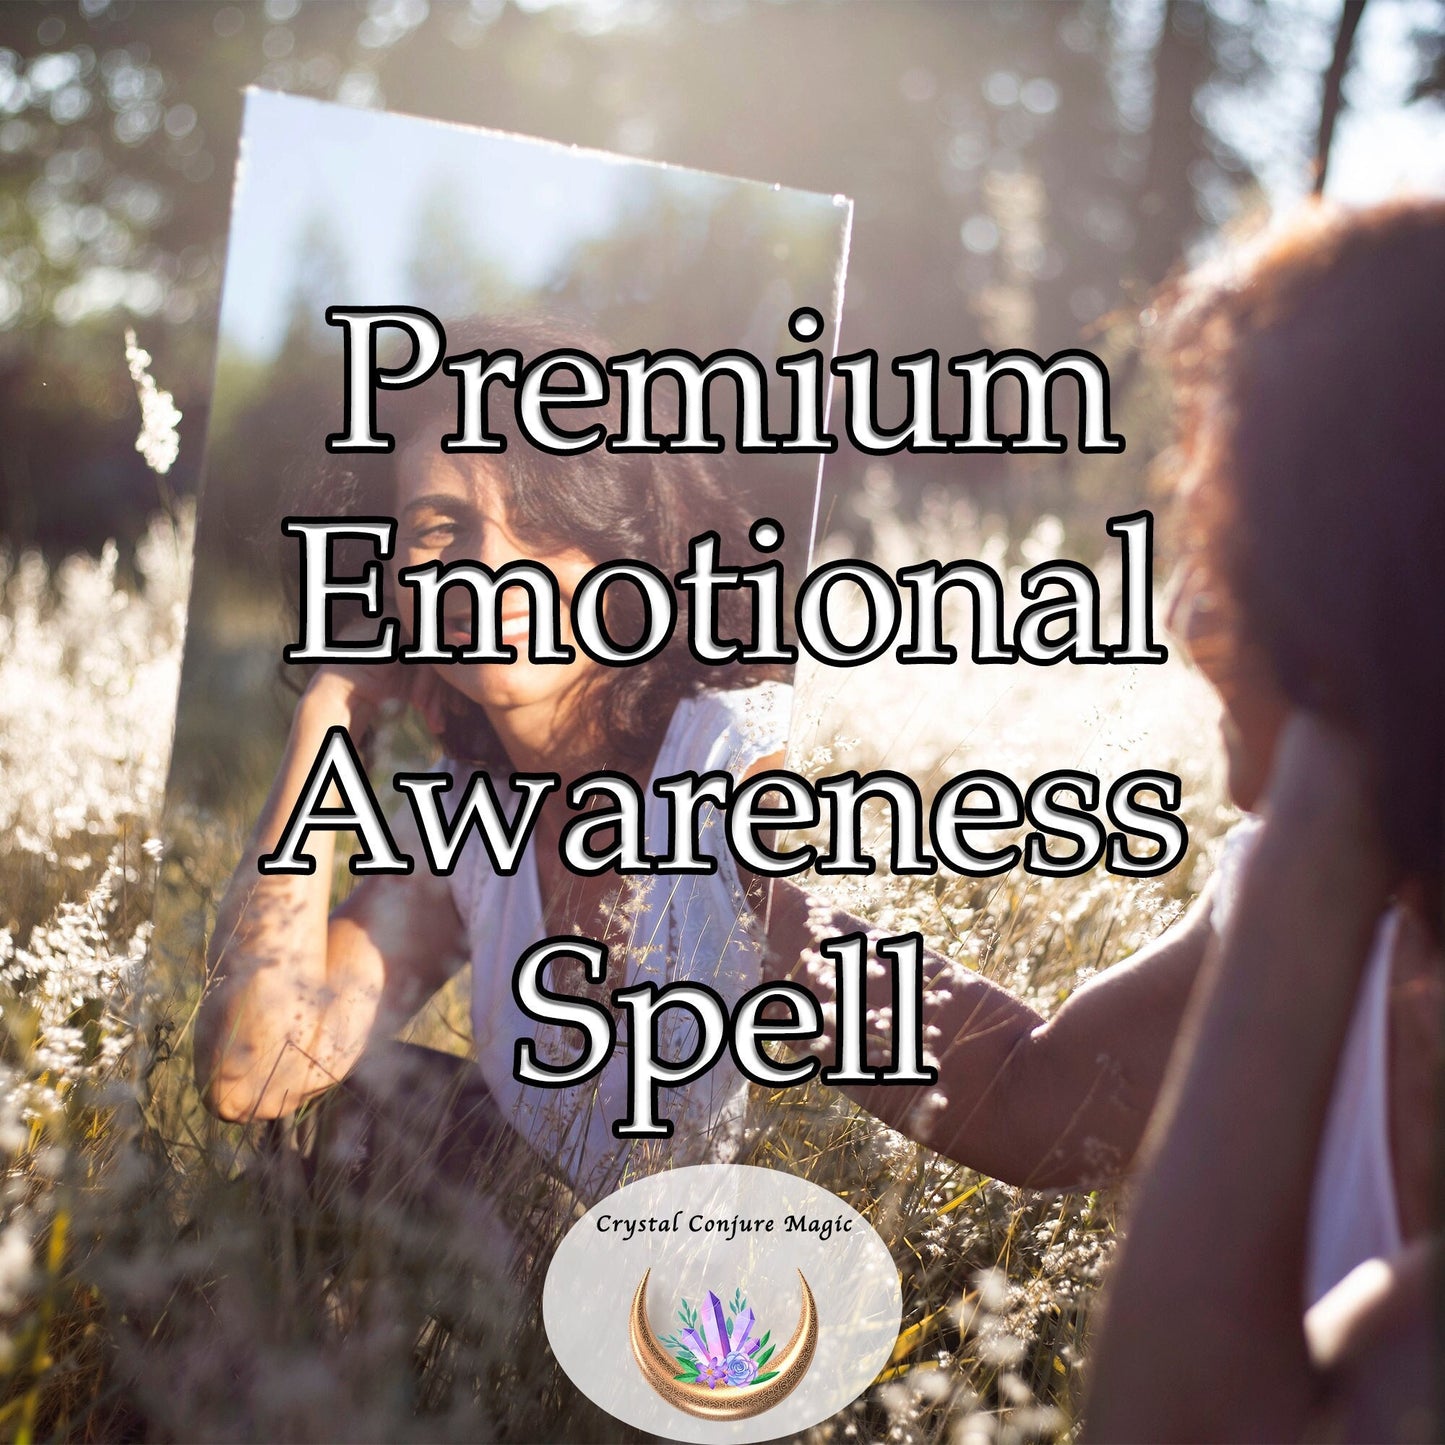 Premium Emotional Awareness Spell - awaken your senses, allowing you to feel and understand your emotions in a profound way